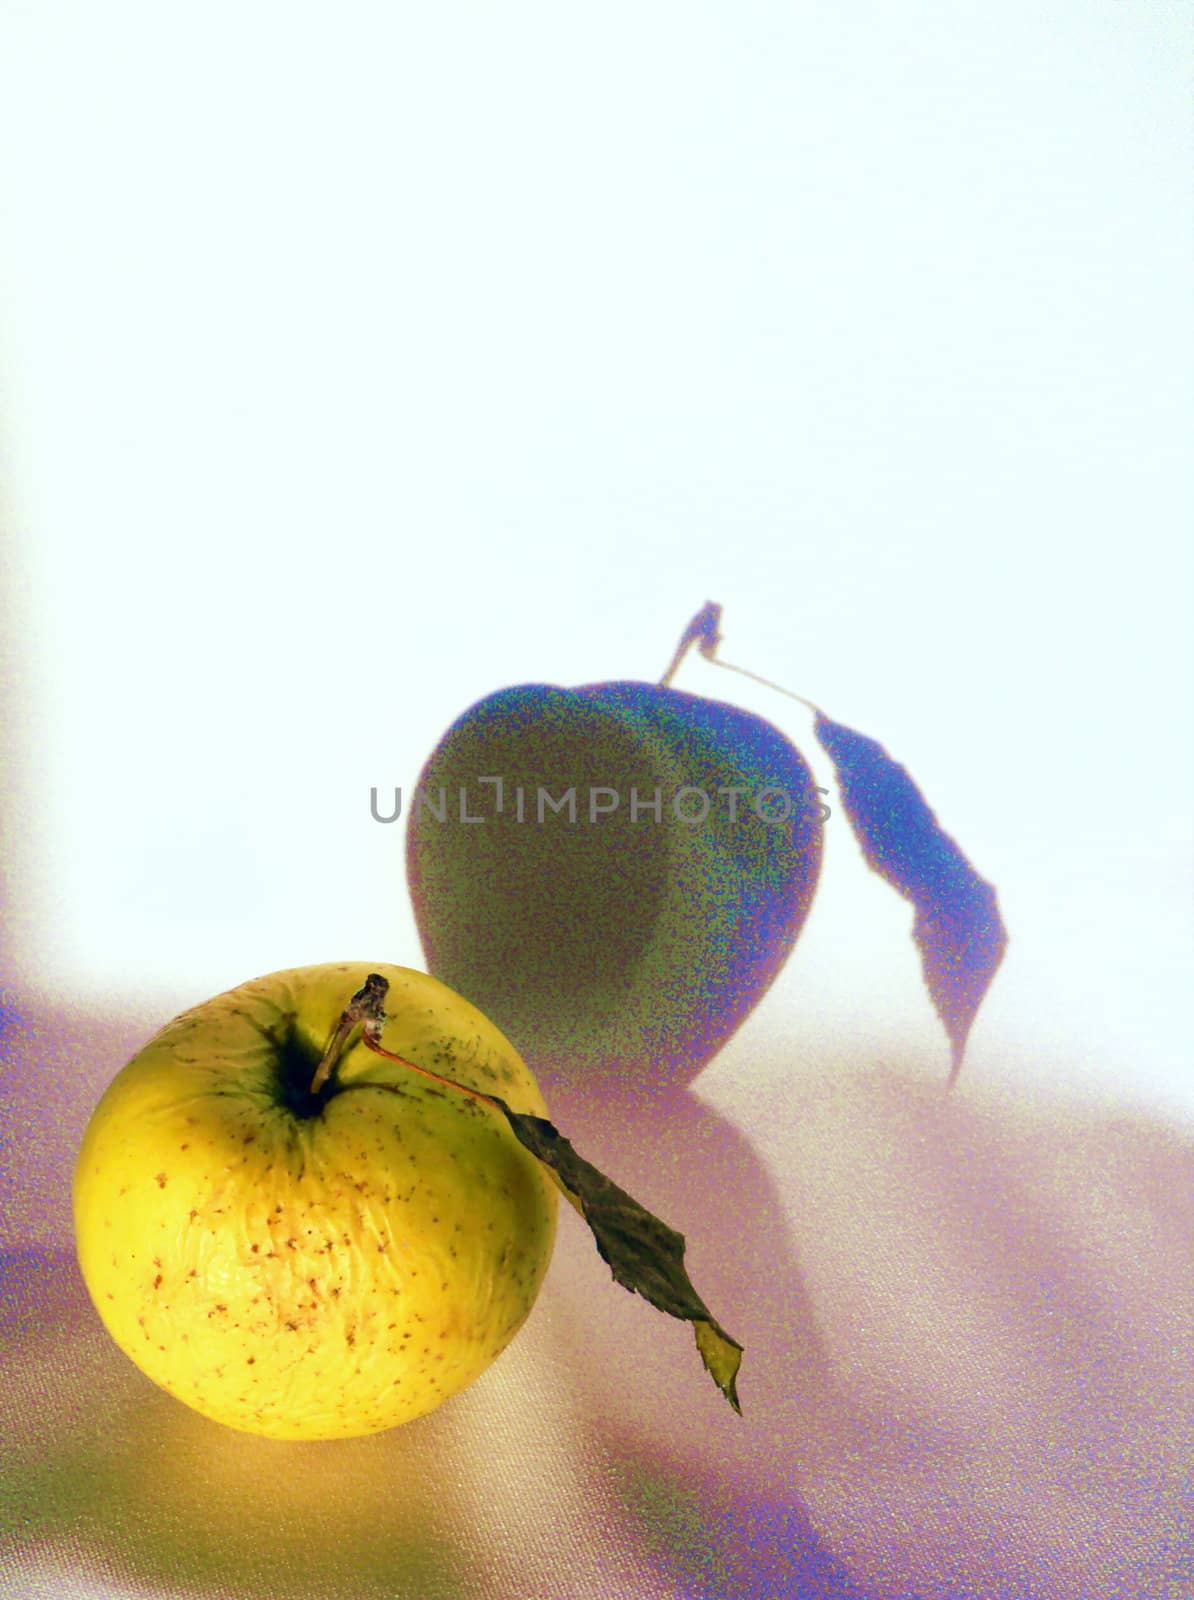 withered apple with leaf and the shadow